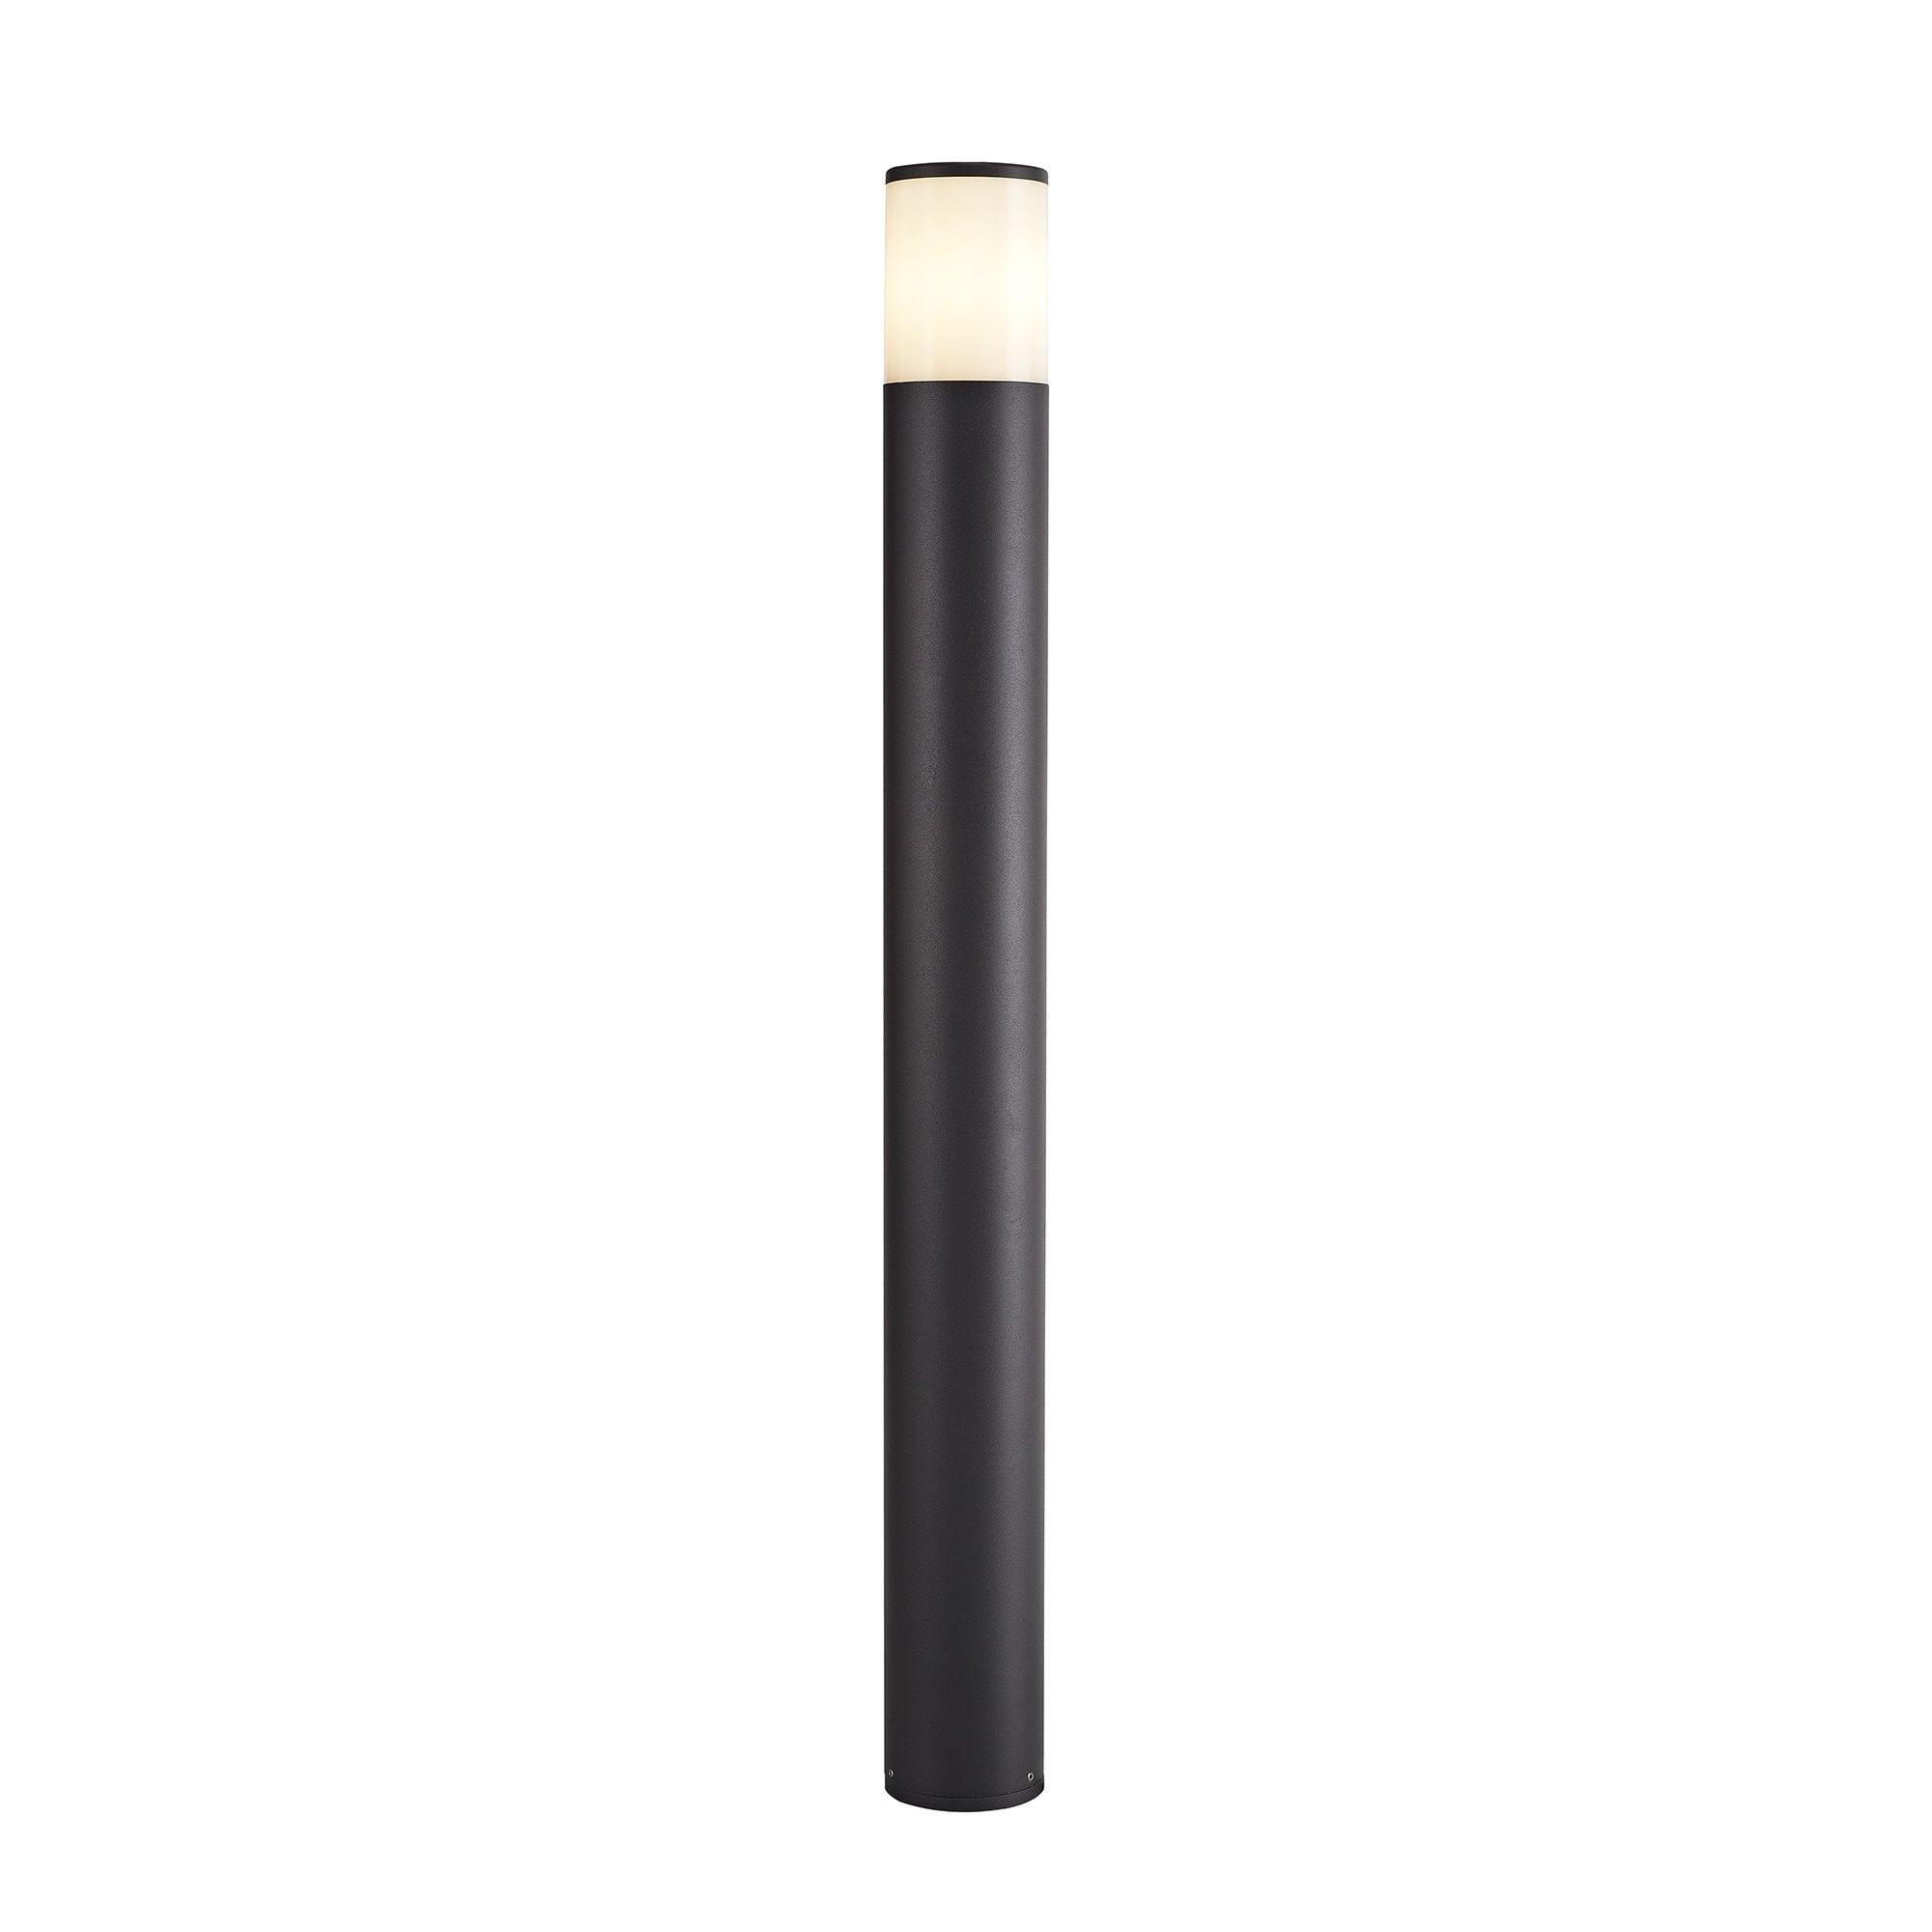 90cm Post Lamp 1 x E27, IP54, Anthracite/Smoked, 2yrs Warranty